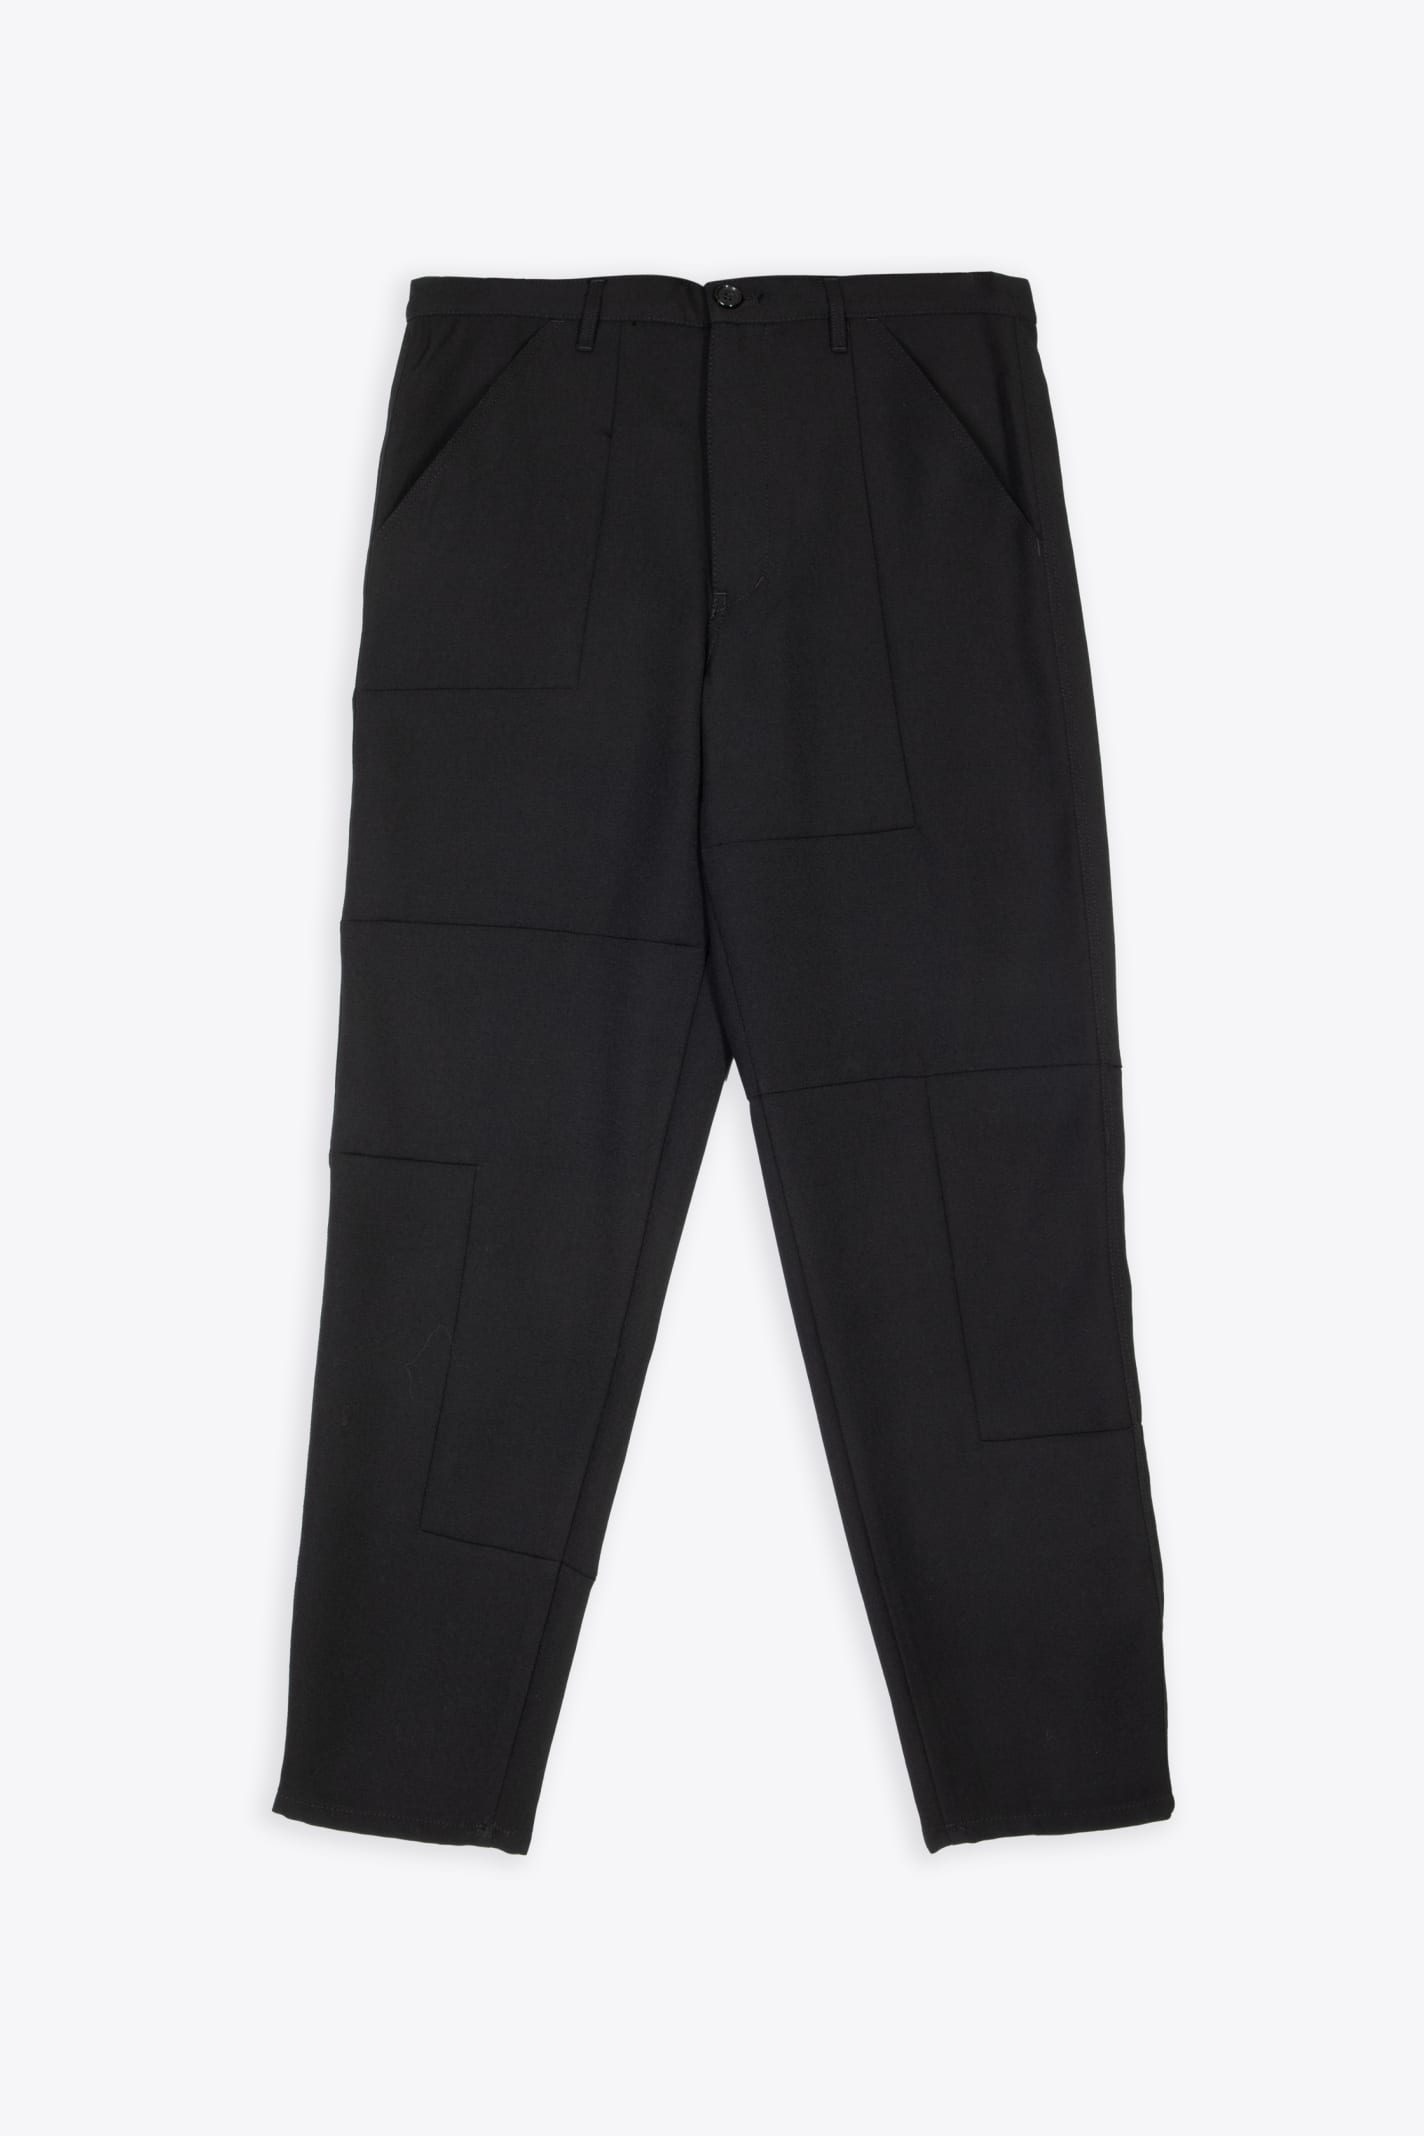 Mens Pants Woven Black wool patchwork tapered pant